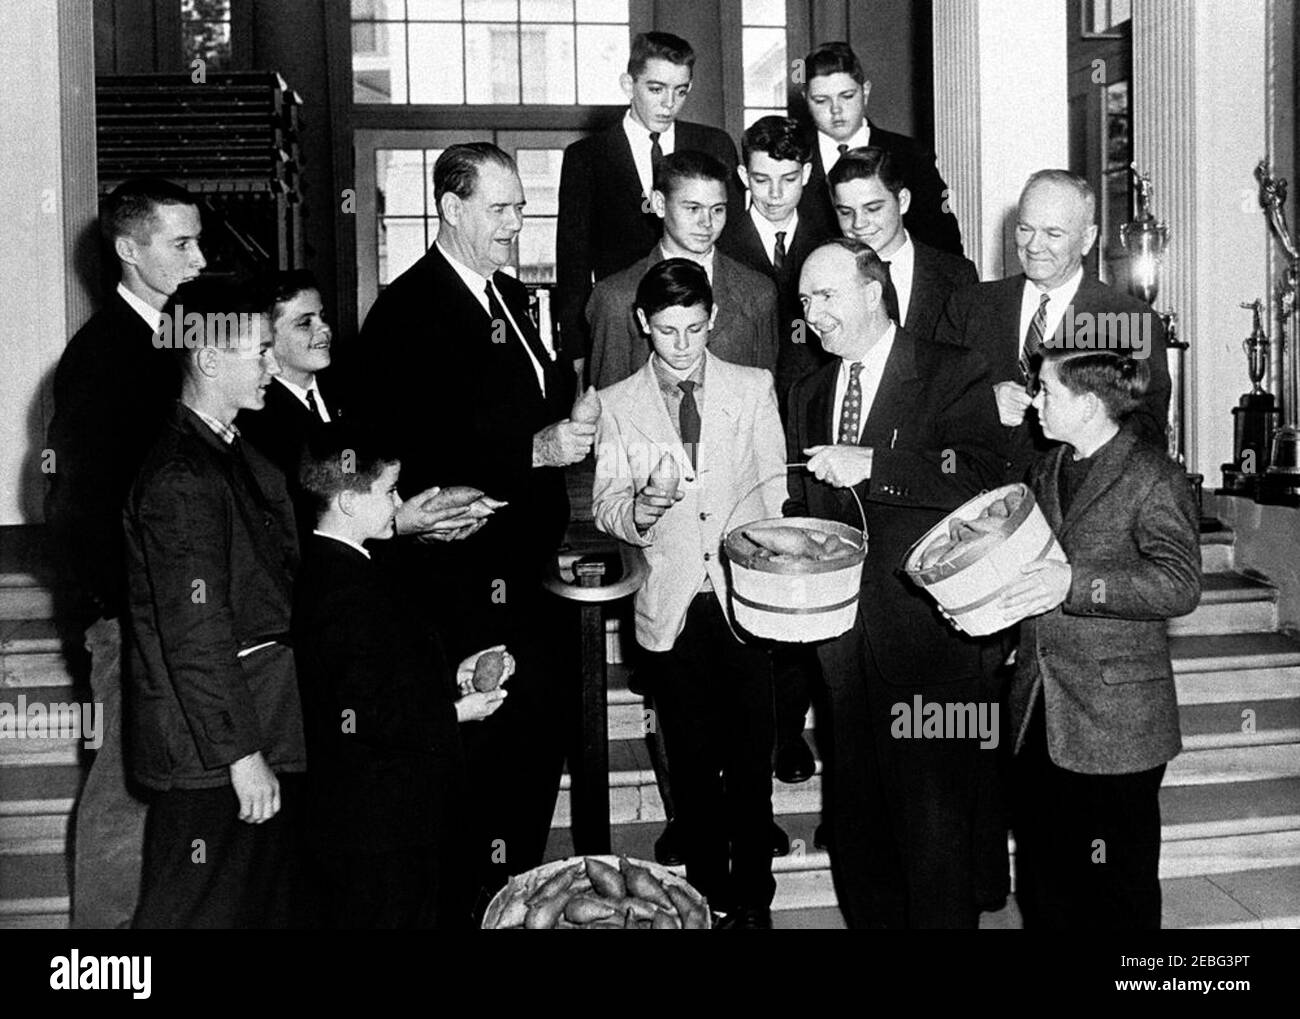 A 4-H Club visits the White House. Special Assistant to the President Dave Powers (holding basket) poses with Senator Olin Johnston of South Carolina (holding sweet potato); the champion 4-H Club sweet potato growers for the State of South Carolina for 1960; and their gift of sweet potatoes at the White House, Washington, D. C. 4-H Club members include: Dan Bates; Gene Ousley; Junior Boykin; Mack Ousley; Dwight Lee; Kenneth Cooper; Paul Linwood Shuler; Carson Blackwell; Donald Bagnall; Henry David Gunter; Ernest Boykin. The man right of Dave Powers is unidentified.rn Stock Photo